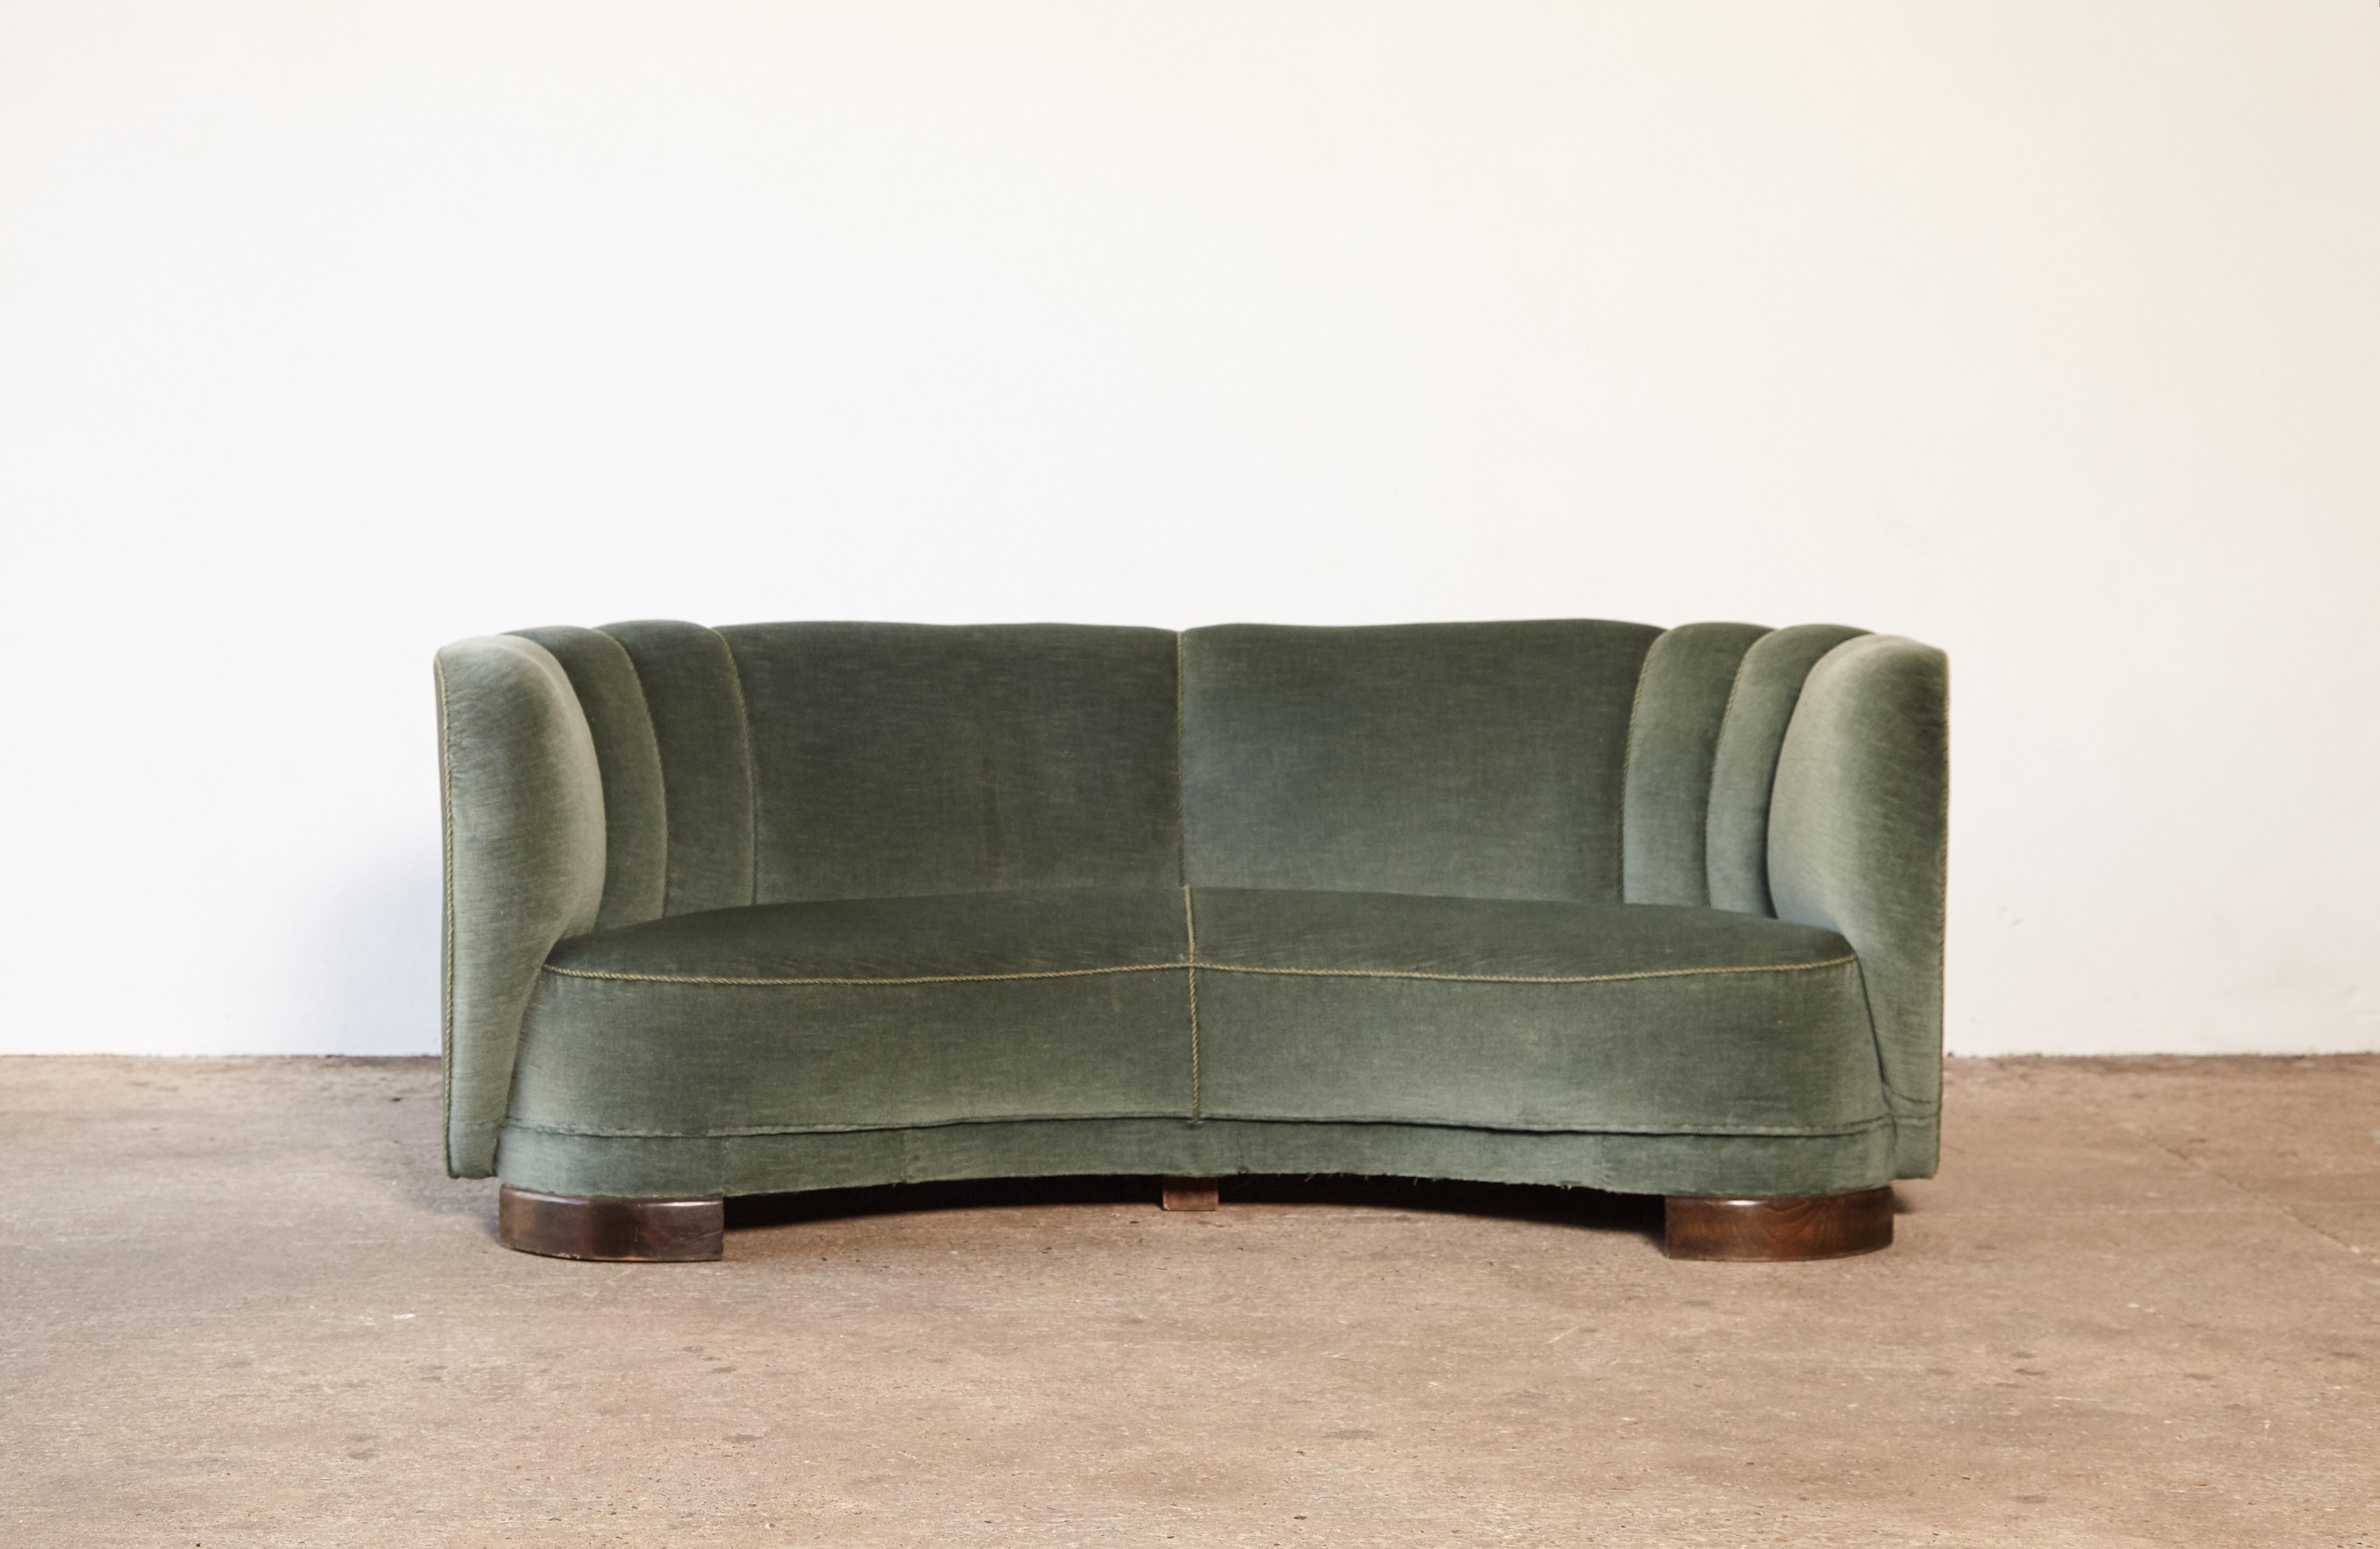 Banana shaped curved sofa in the style of Viggo Boesen and Fritz Hansen, made in Denmark, 1940s. Some wear to piping and green velvet fabric on the back.

 